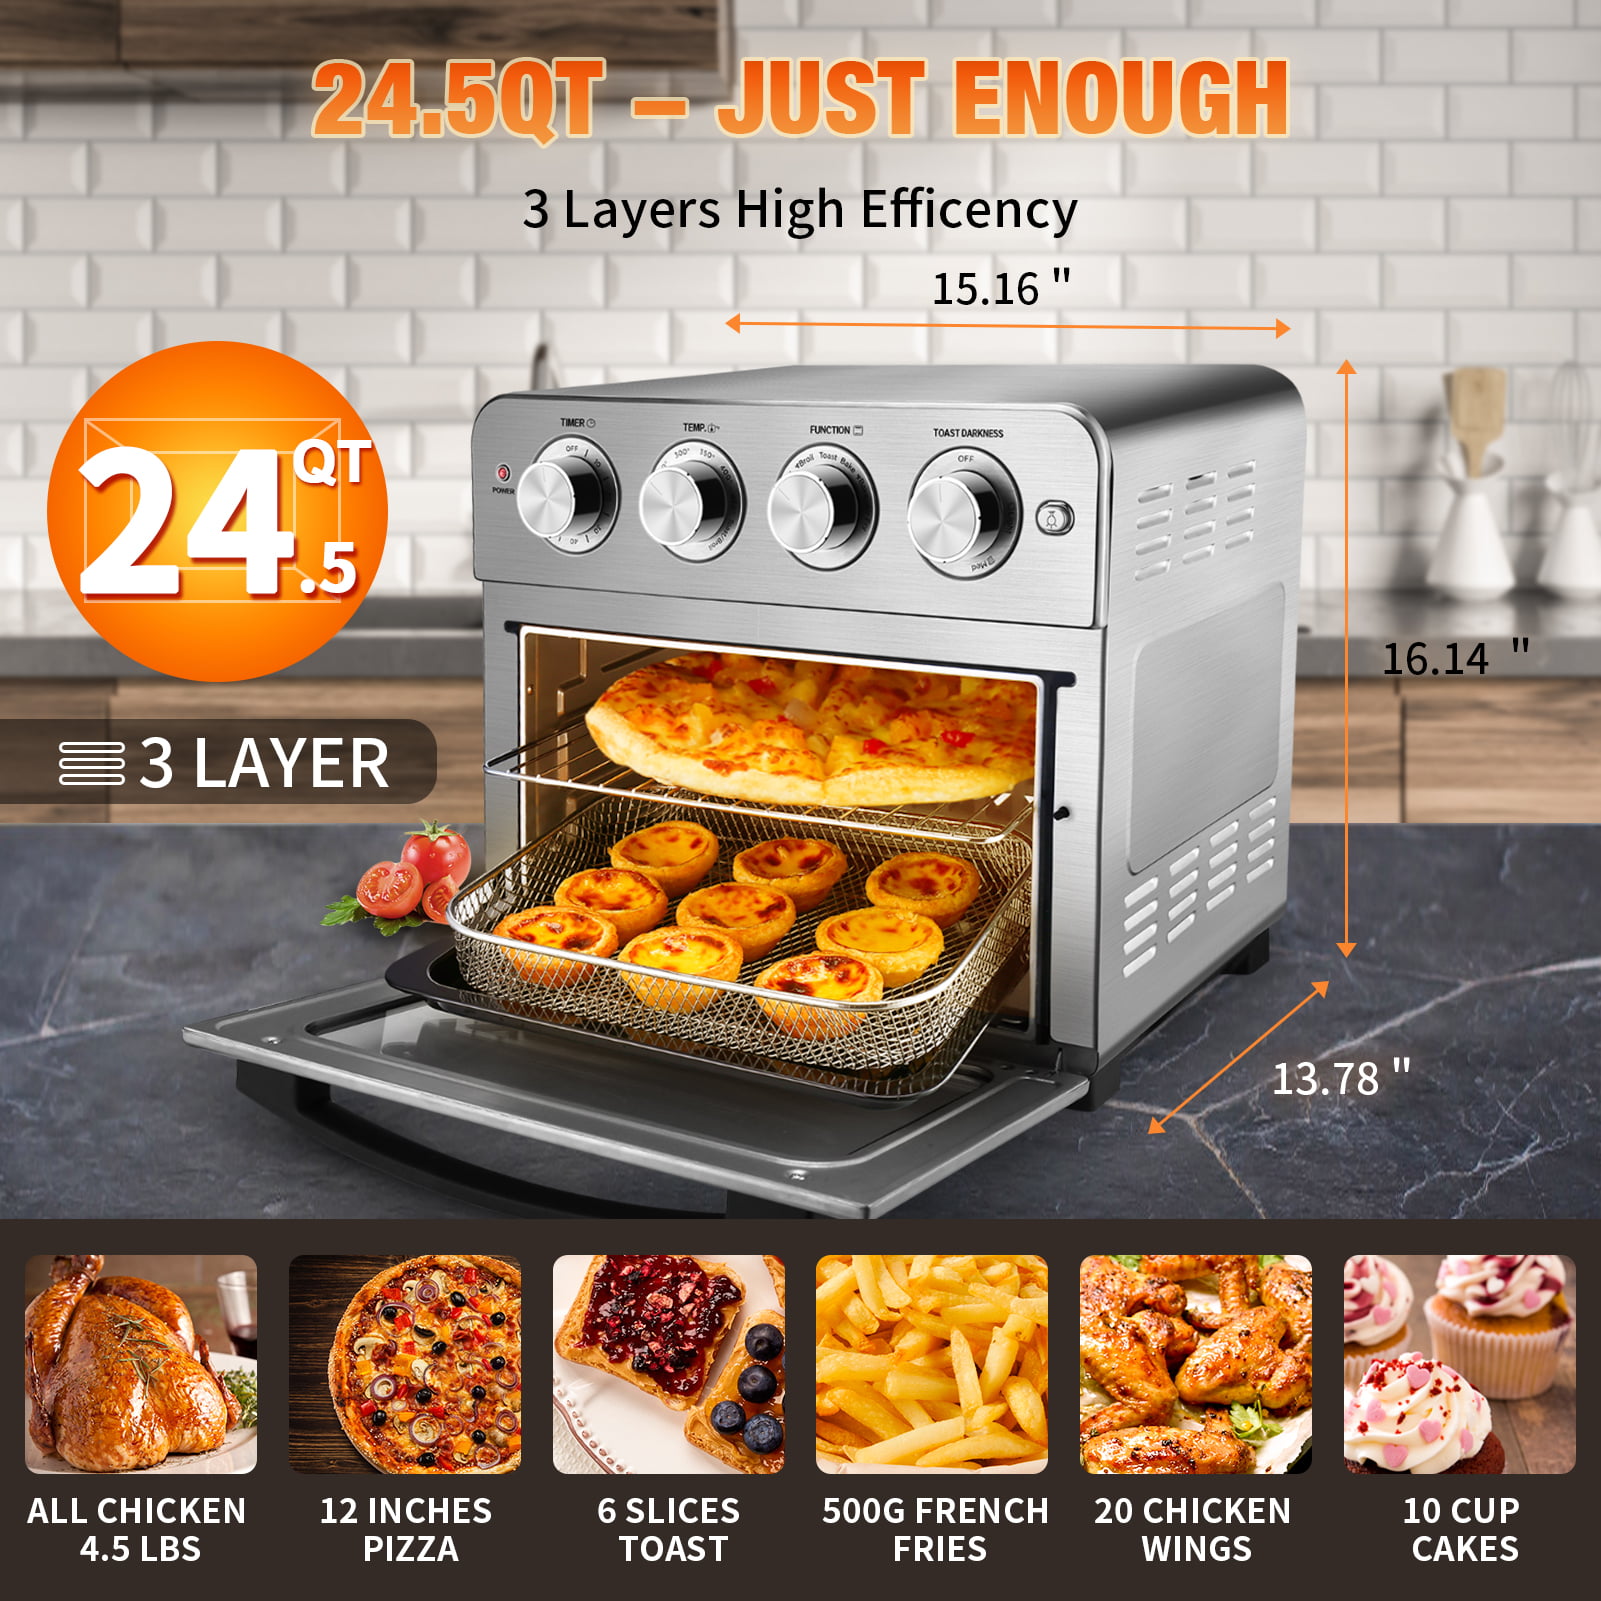 Holiday Clearance! Geek Chef Air Fryer Oven , Countertop Toaster Oven,  3-Rack Levels, 4 mechinical knobs，Black housing with single glass door(24  QT